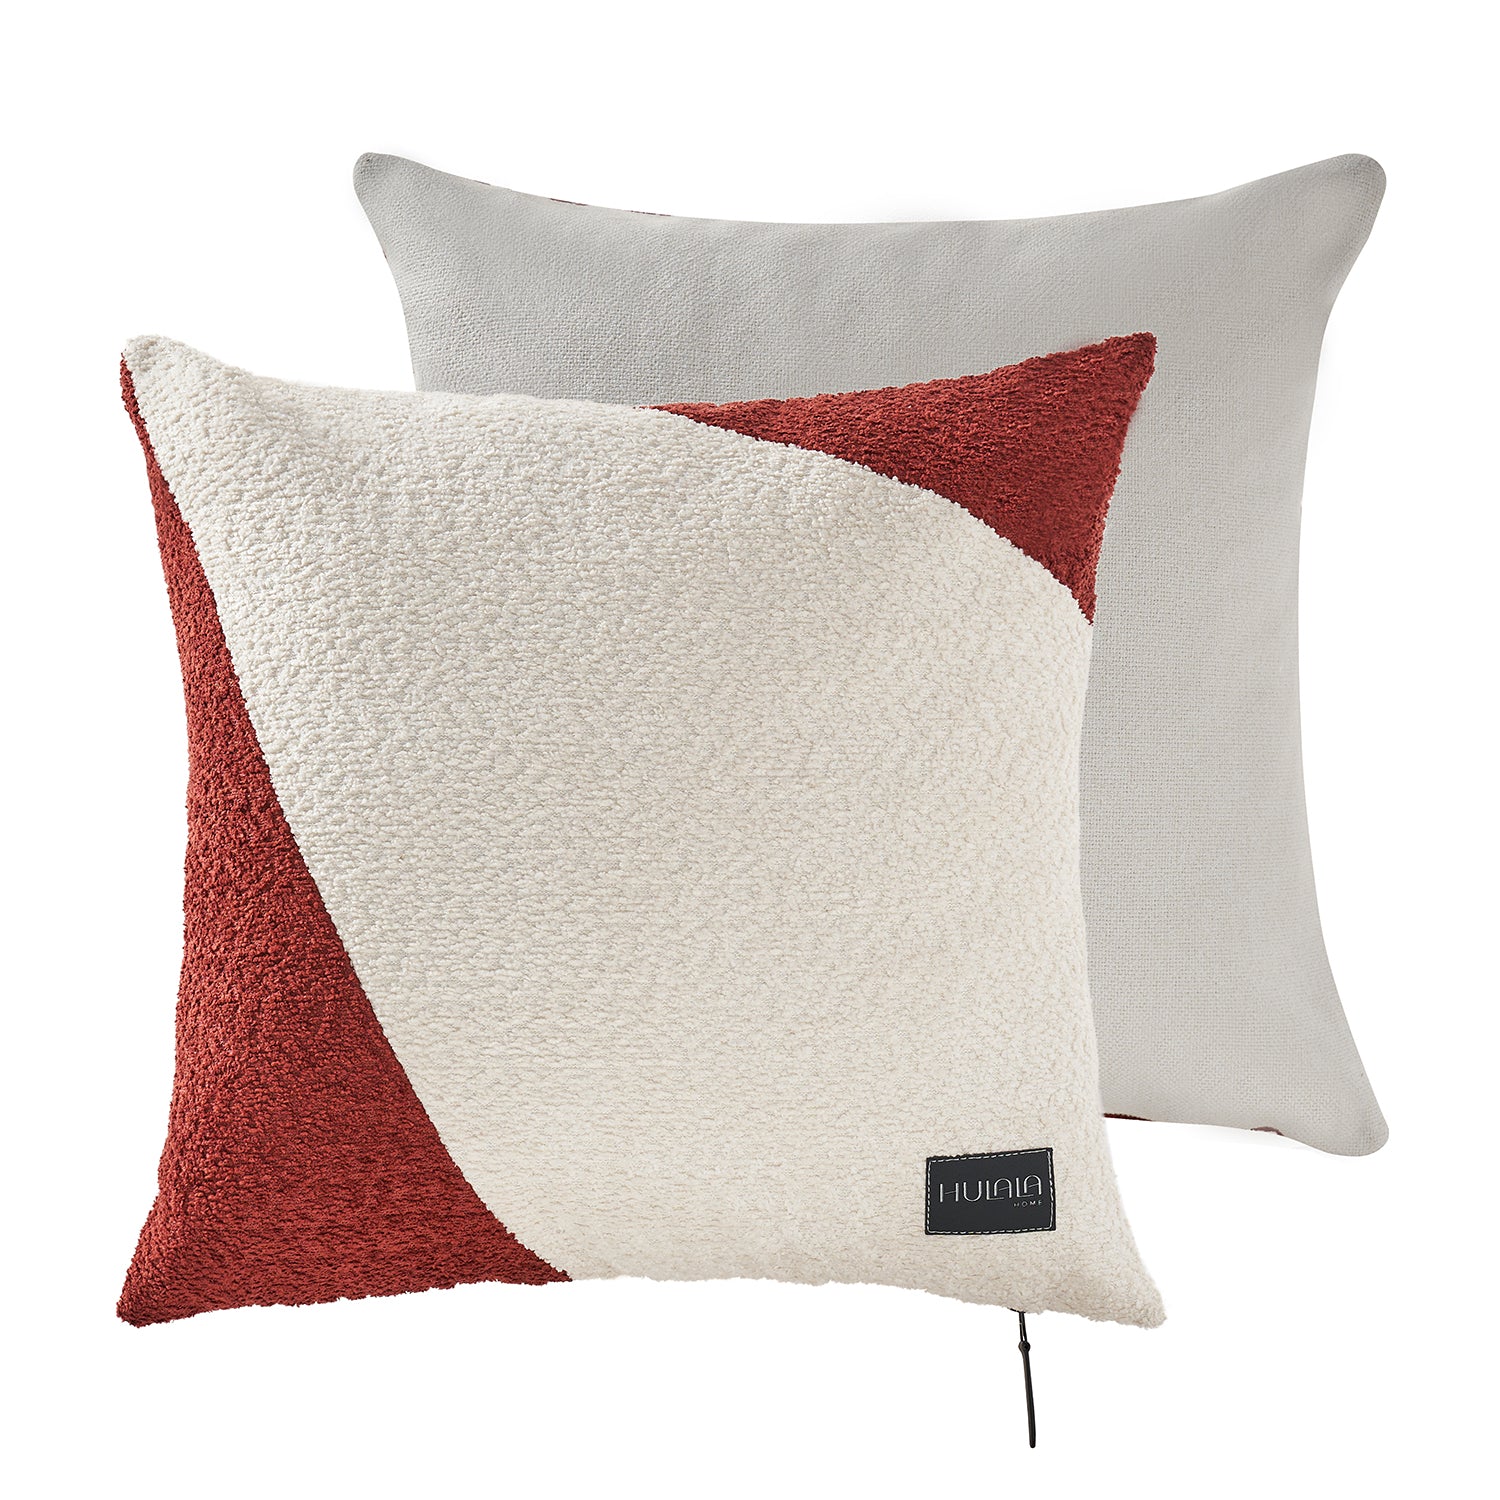 Patchwork Throw Pillow Cover Set of 2